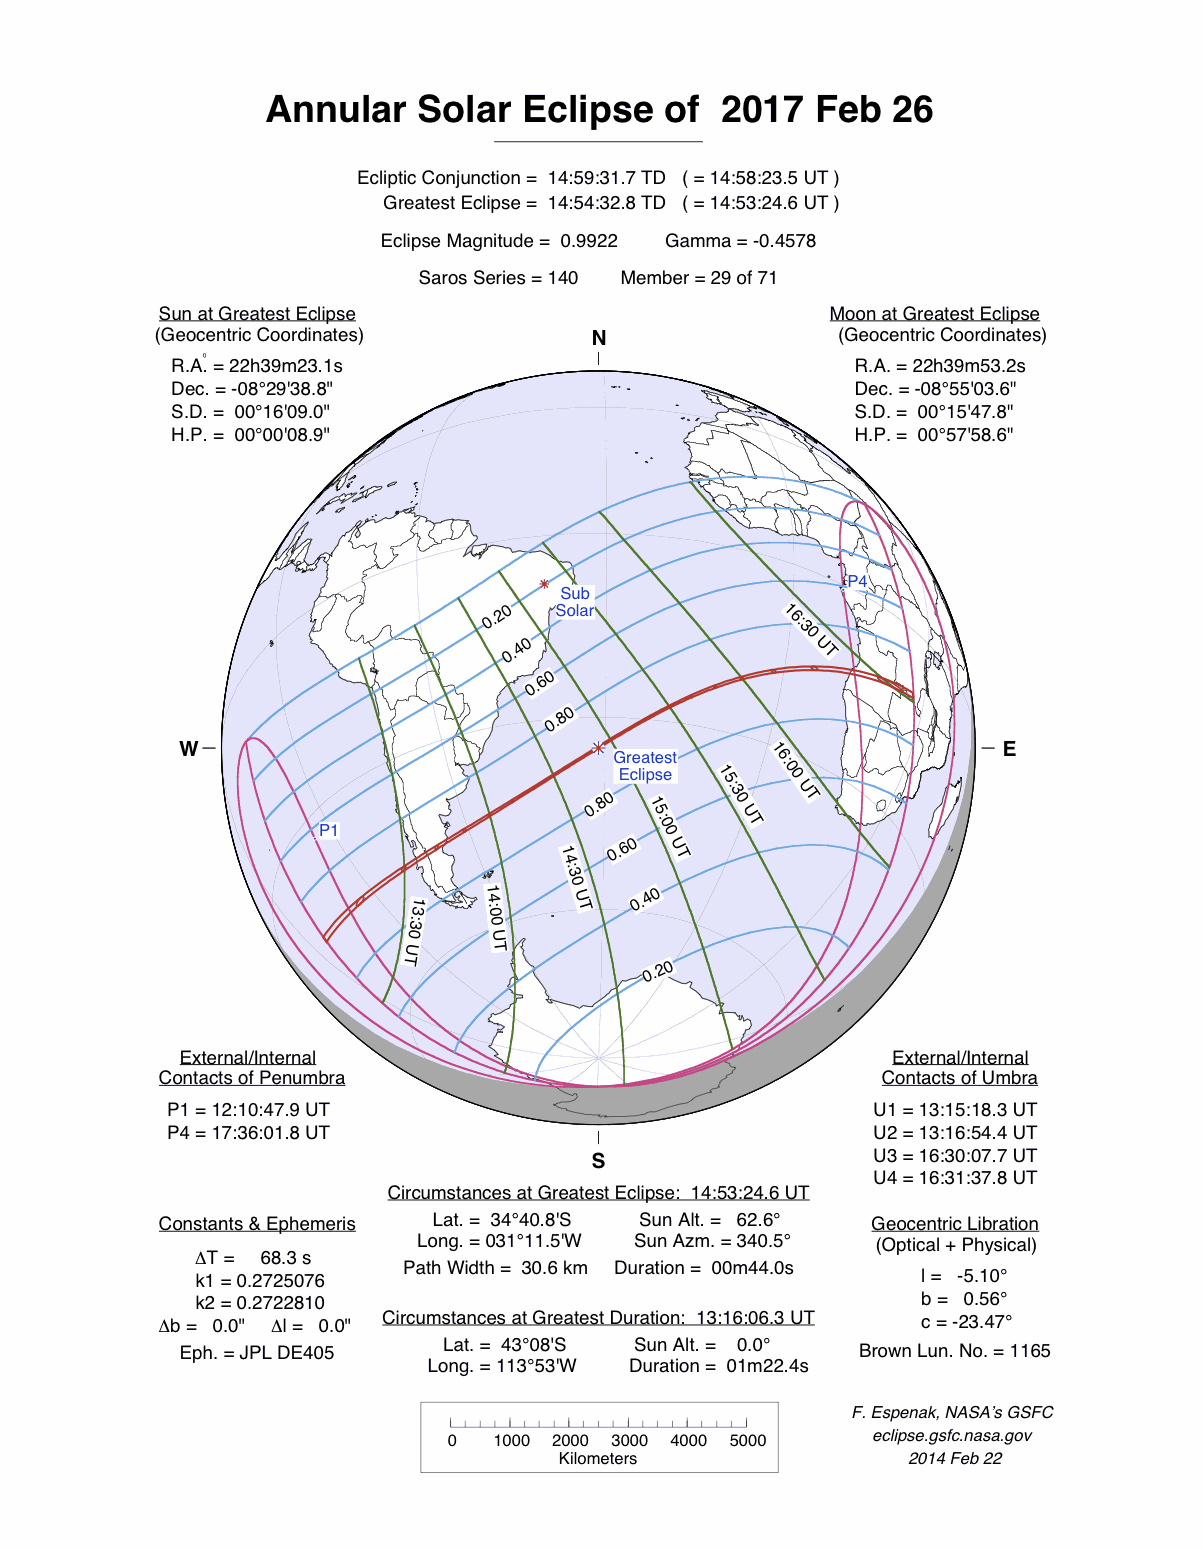 This NASA chart shows the path of the Feb. 26, 2017 annular solar eclipse, also known as a "ring of fire" eclipse.